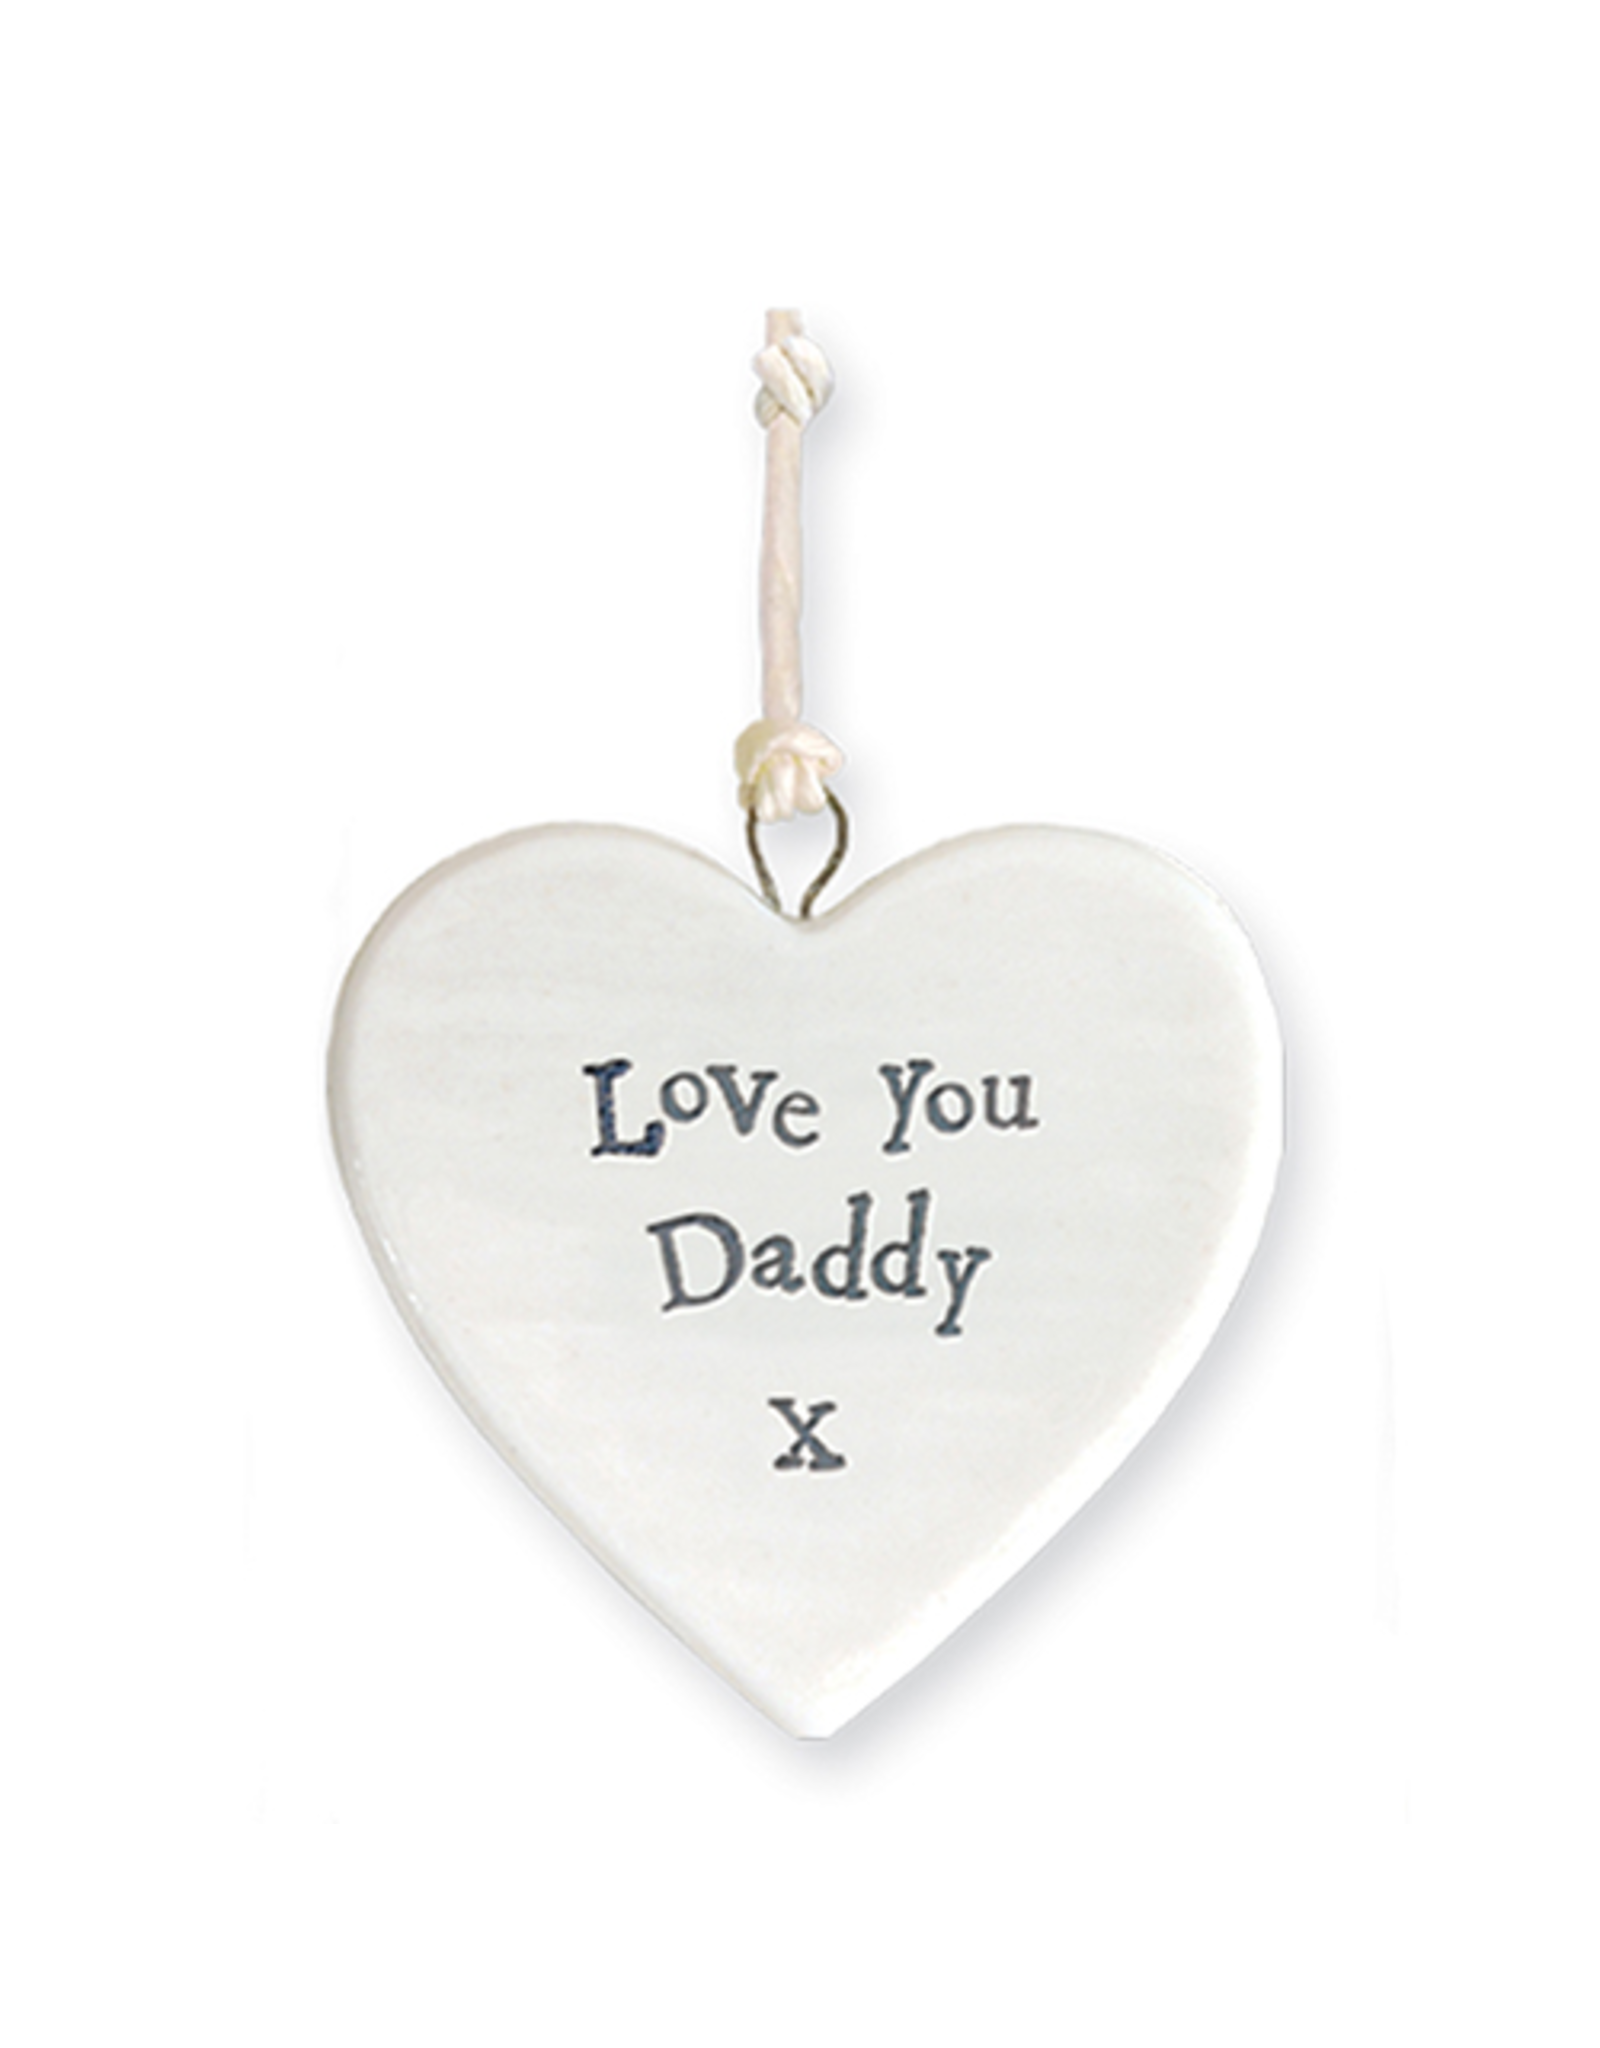 East of India Porcelain Heart Ornament 4173 Love You Daddy X